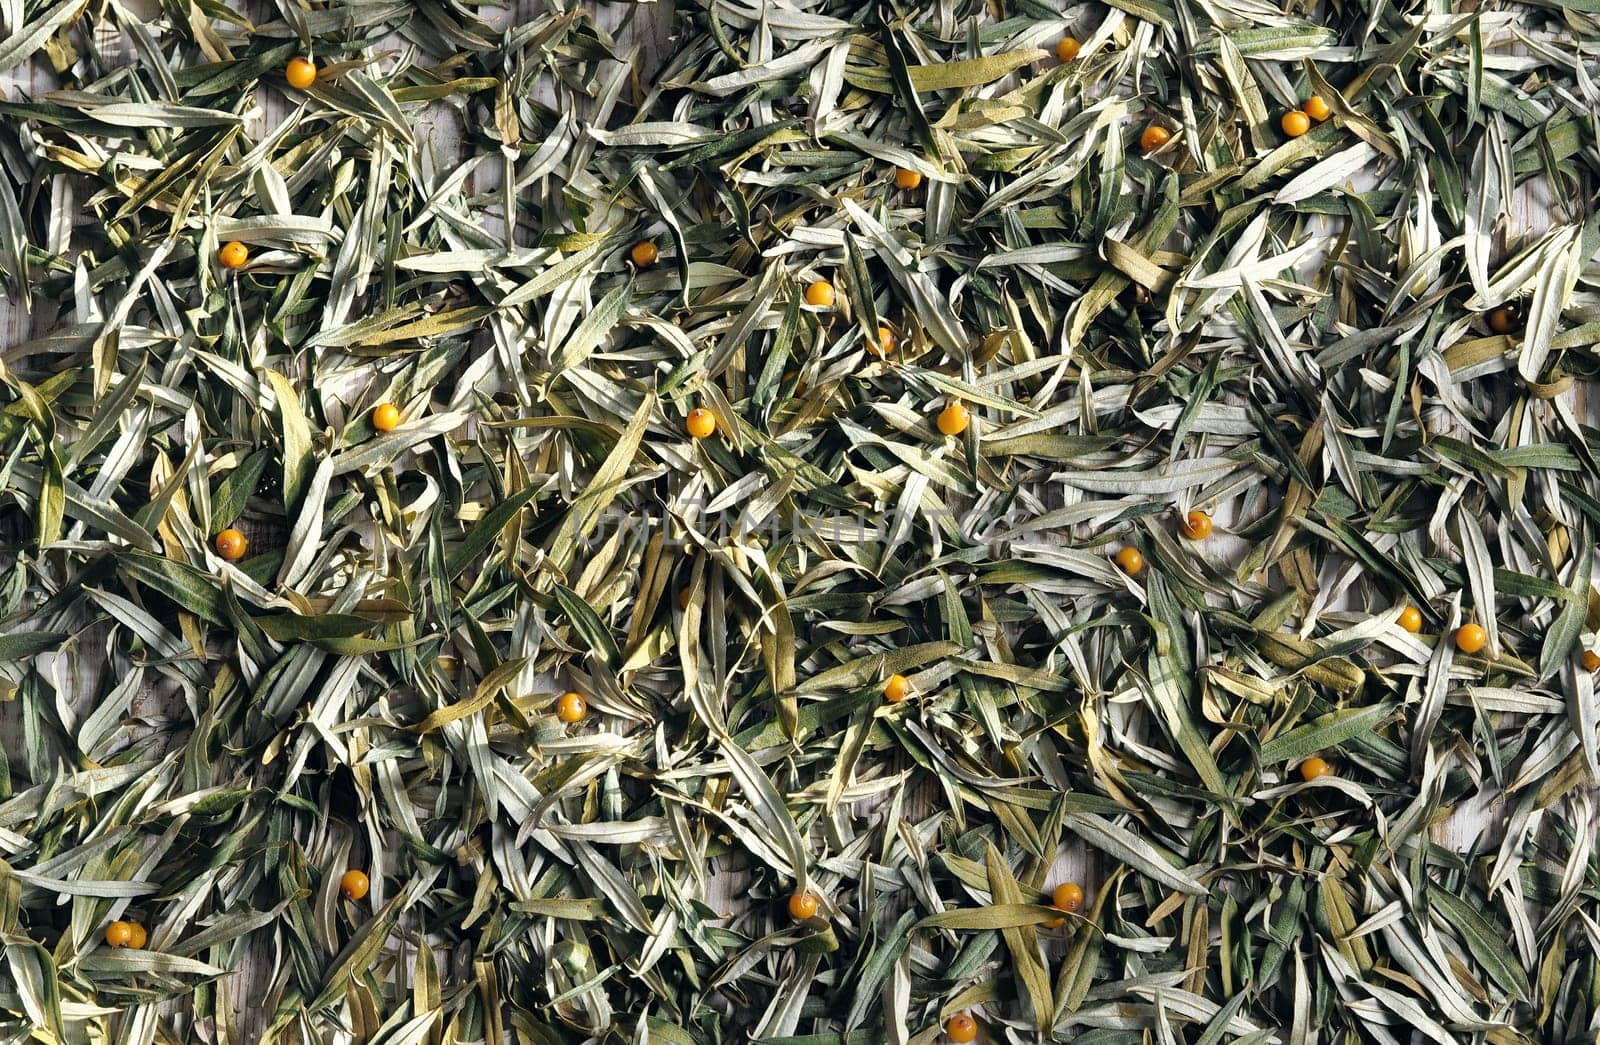 A bunch of dry sea buckthorn leaves prepared for medicinal tea. Autumn background and preparations of medicinal herbs.